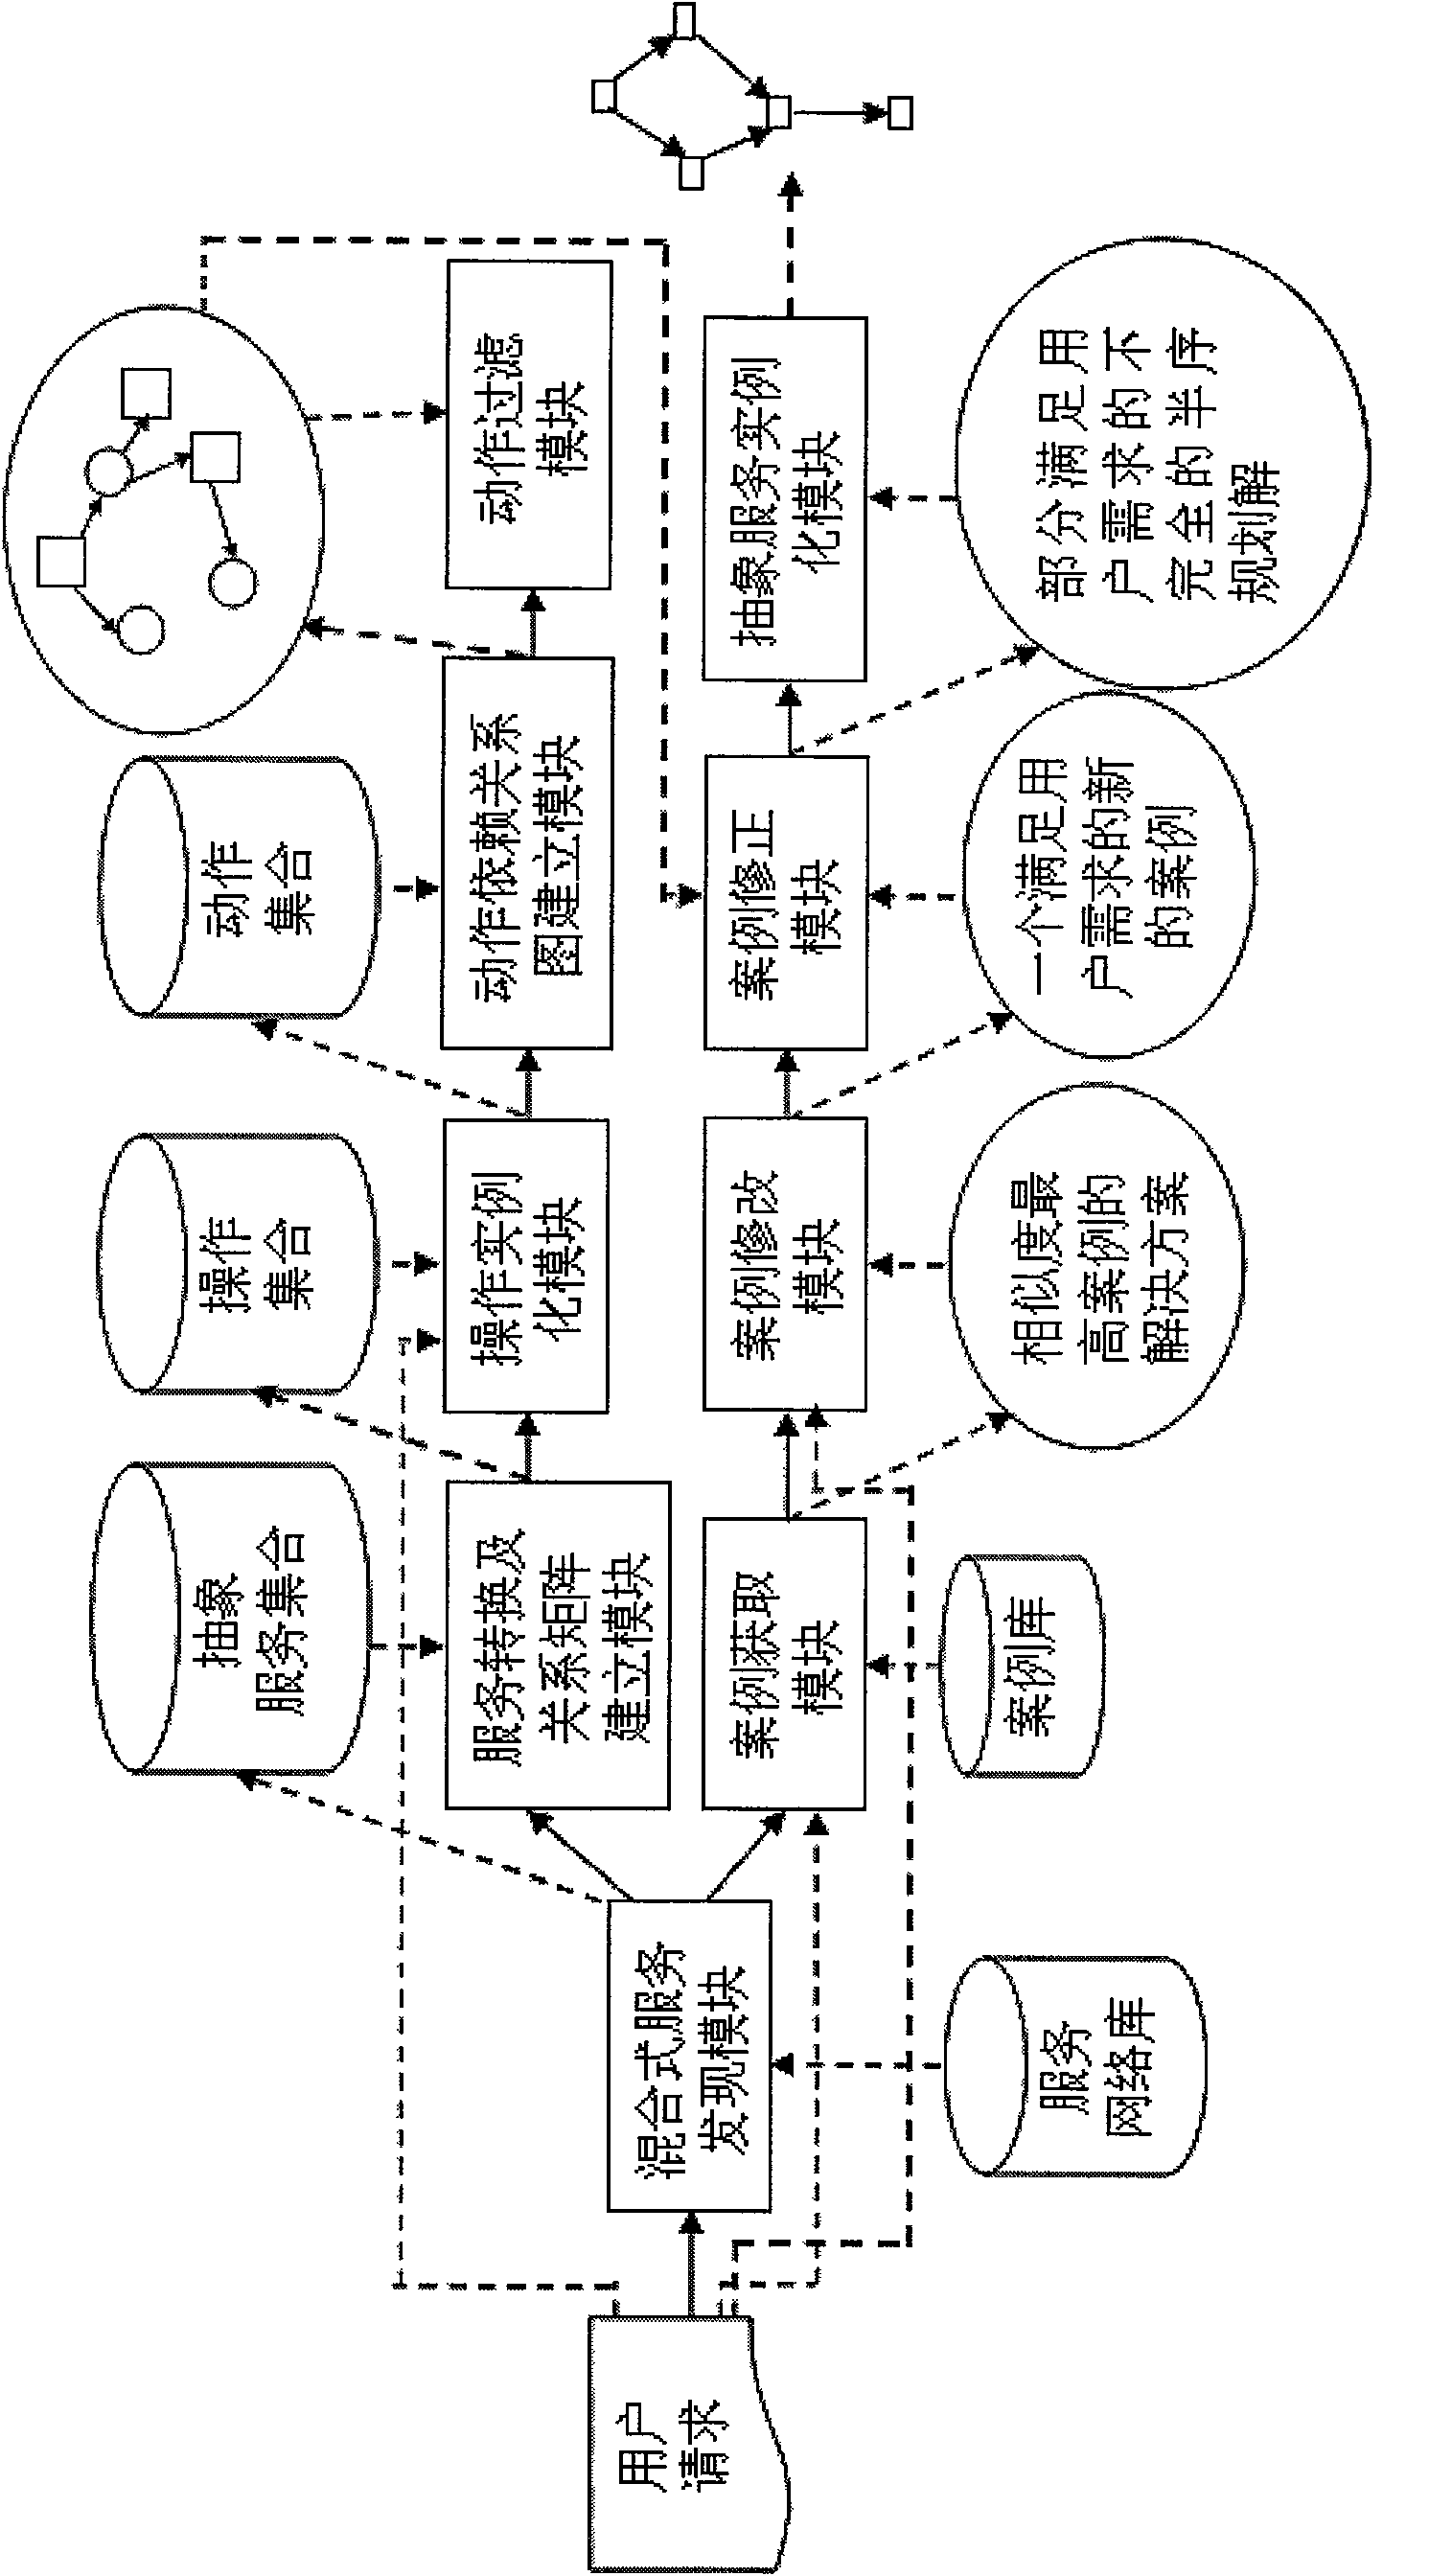 Semantics-based automatic service combination system for web service relation network